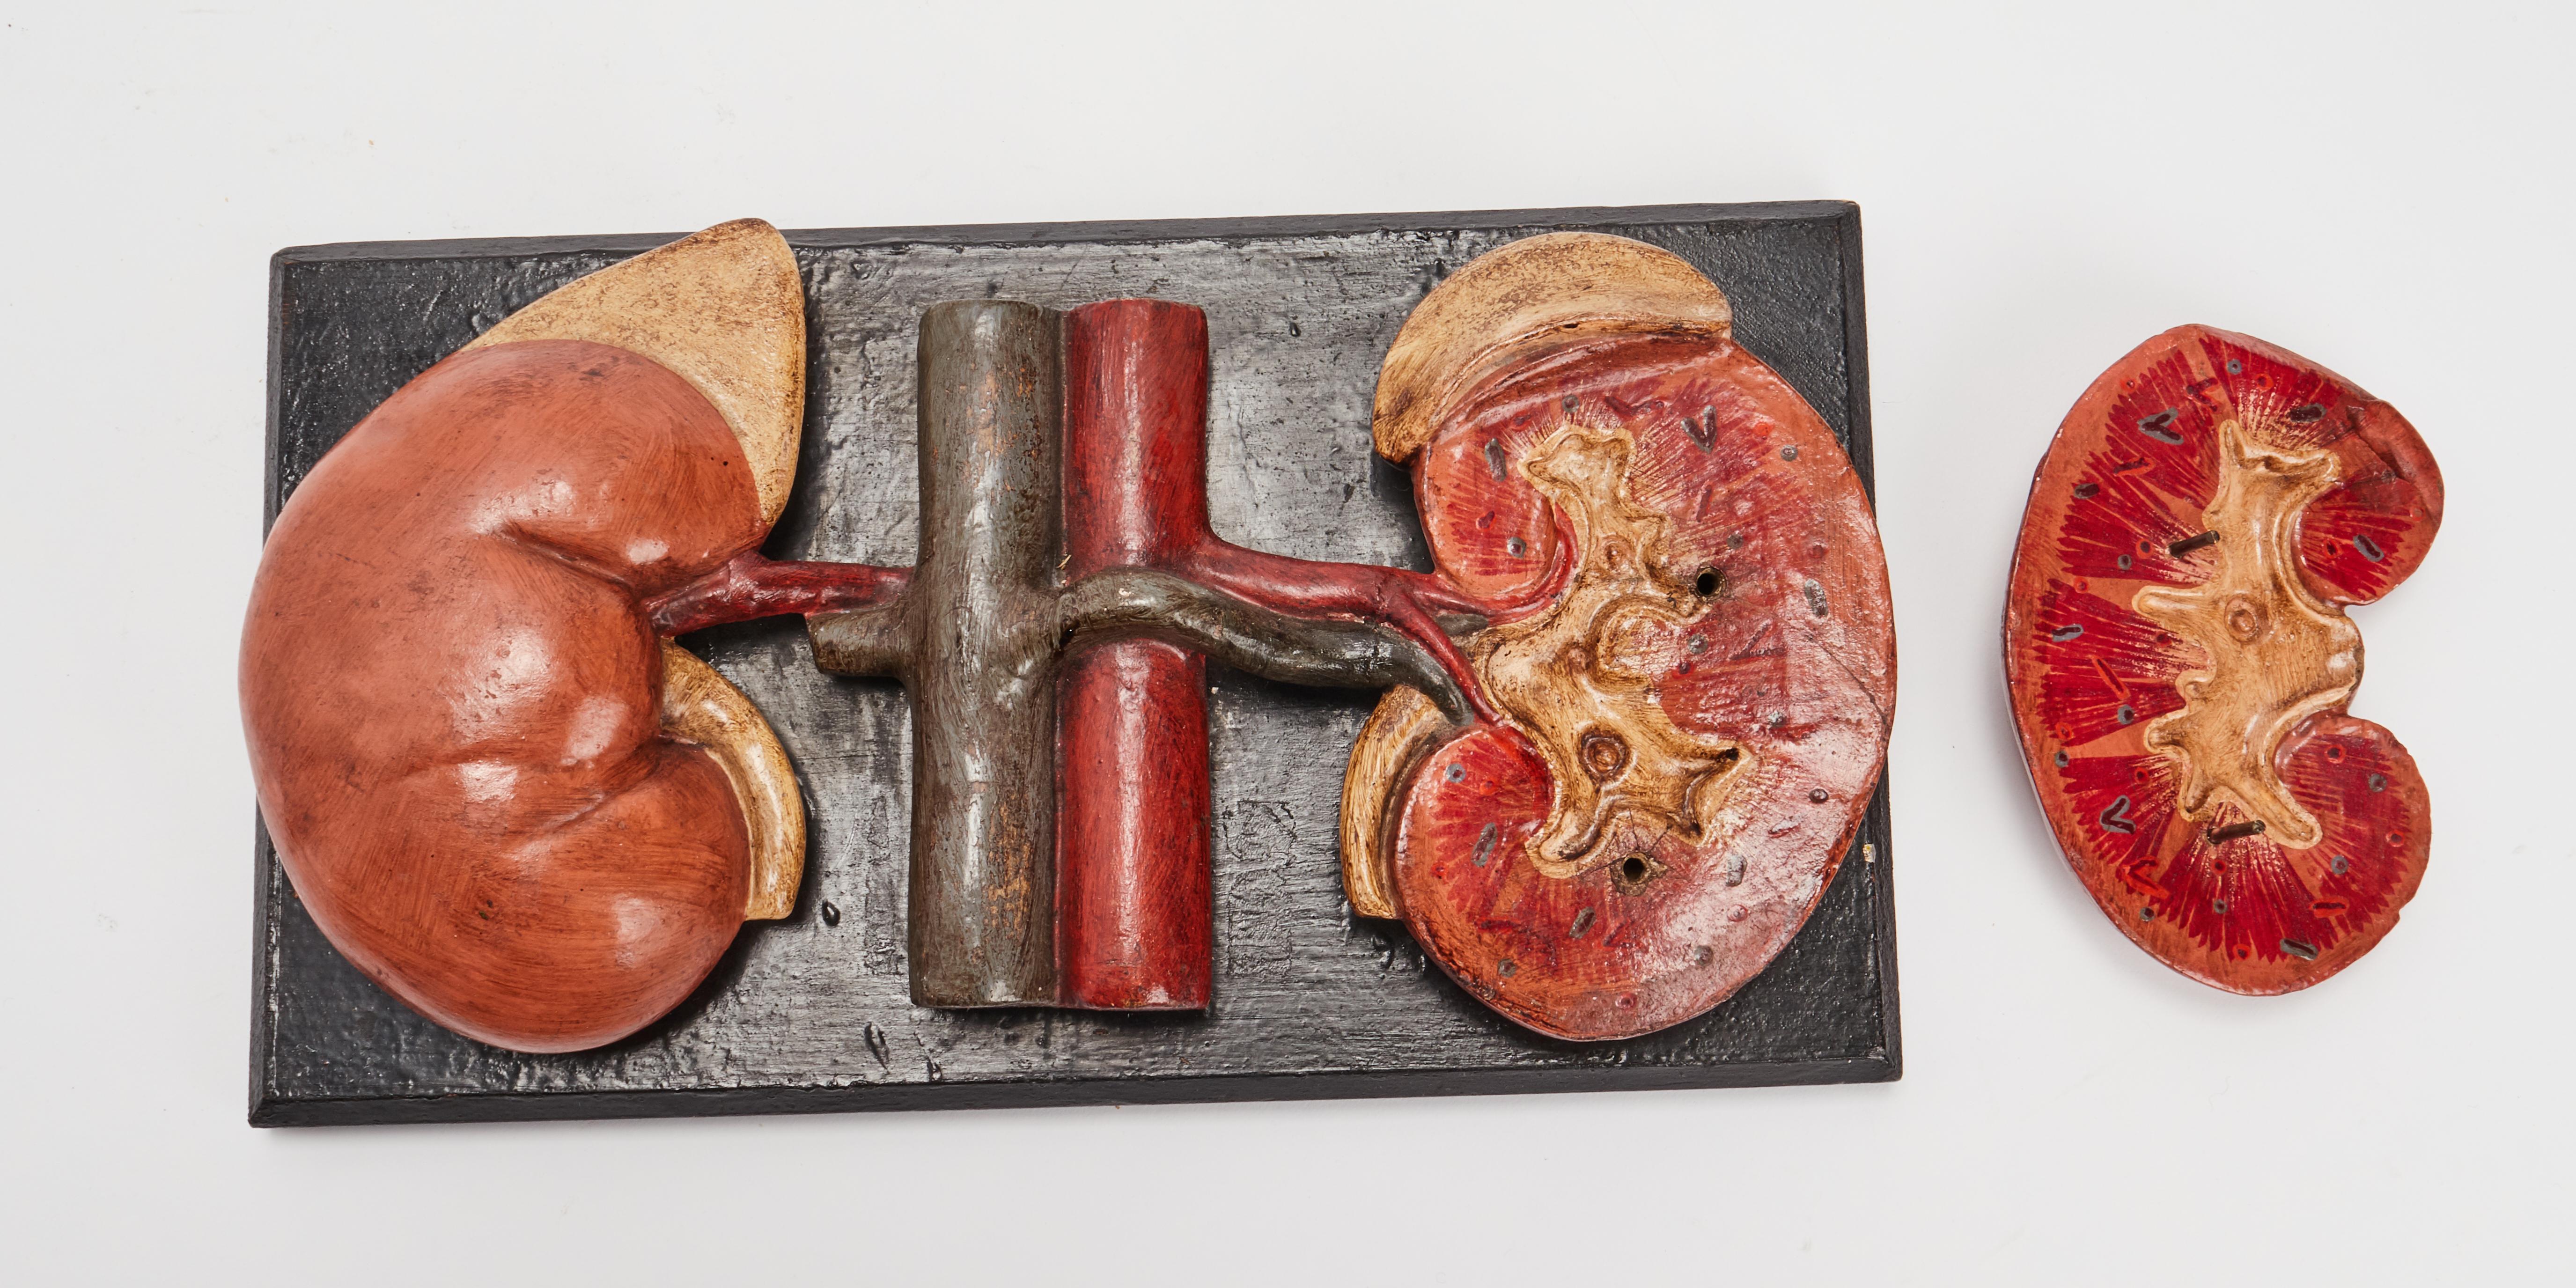 Anatomic model for class, depicting the kidneys, made out of painted papier maché and mounted over a black painted wooden base. Spain circa 1890.